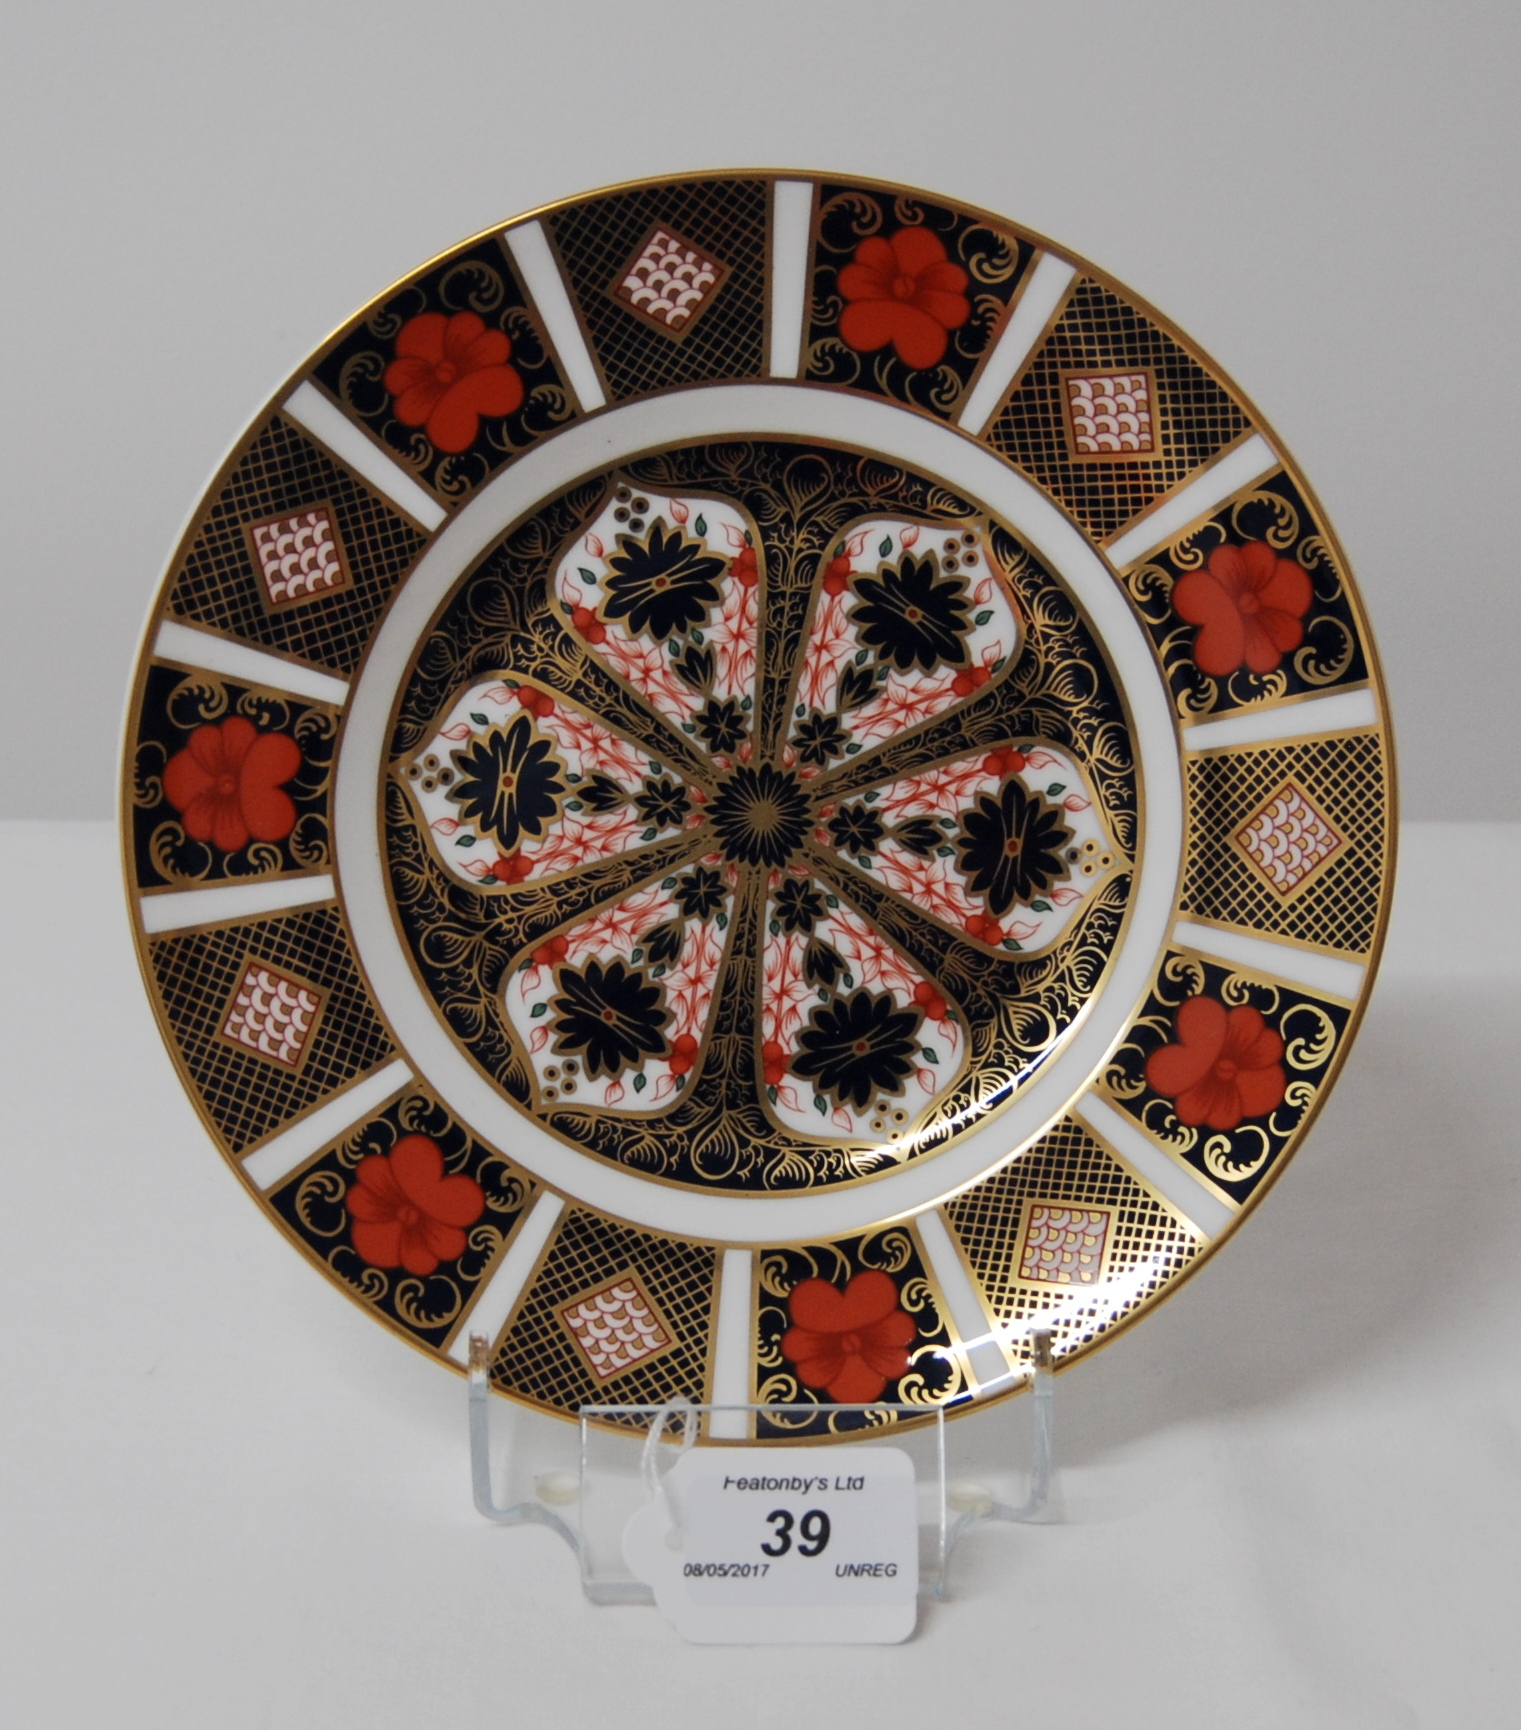 FIRST QUALITY ROYAL CROWN DERBY OLD IMARI PLATE NO. 1128, DATE CODE MMX (2010) 21.5CM DIAMETER.